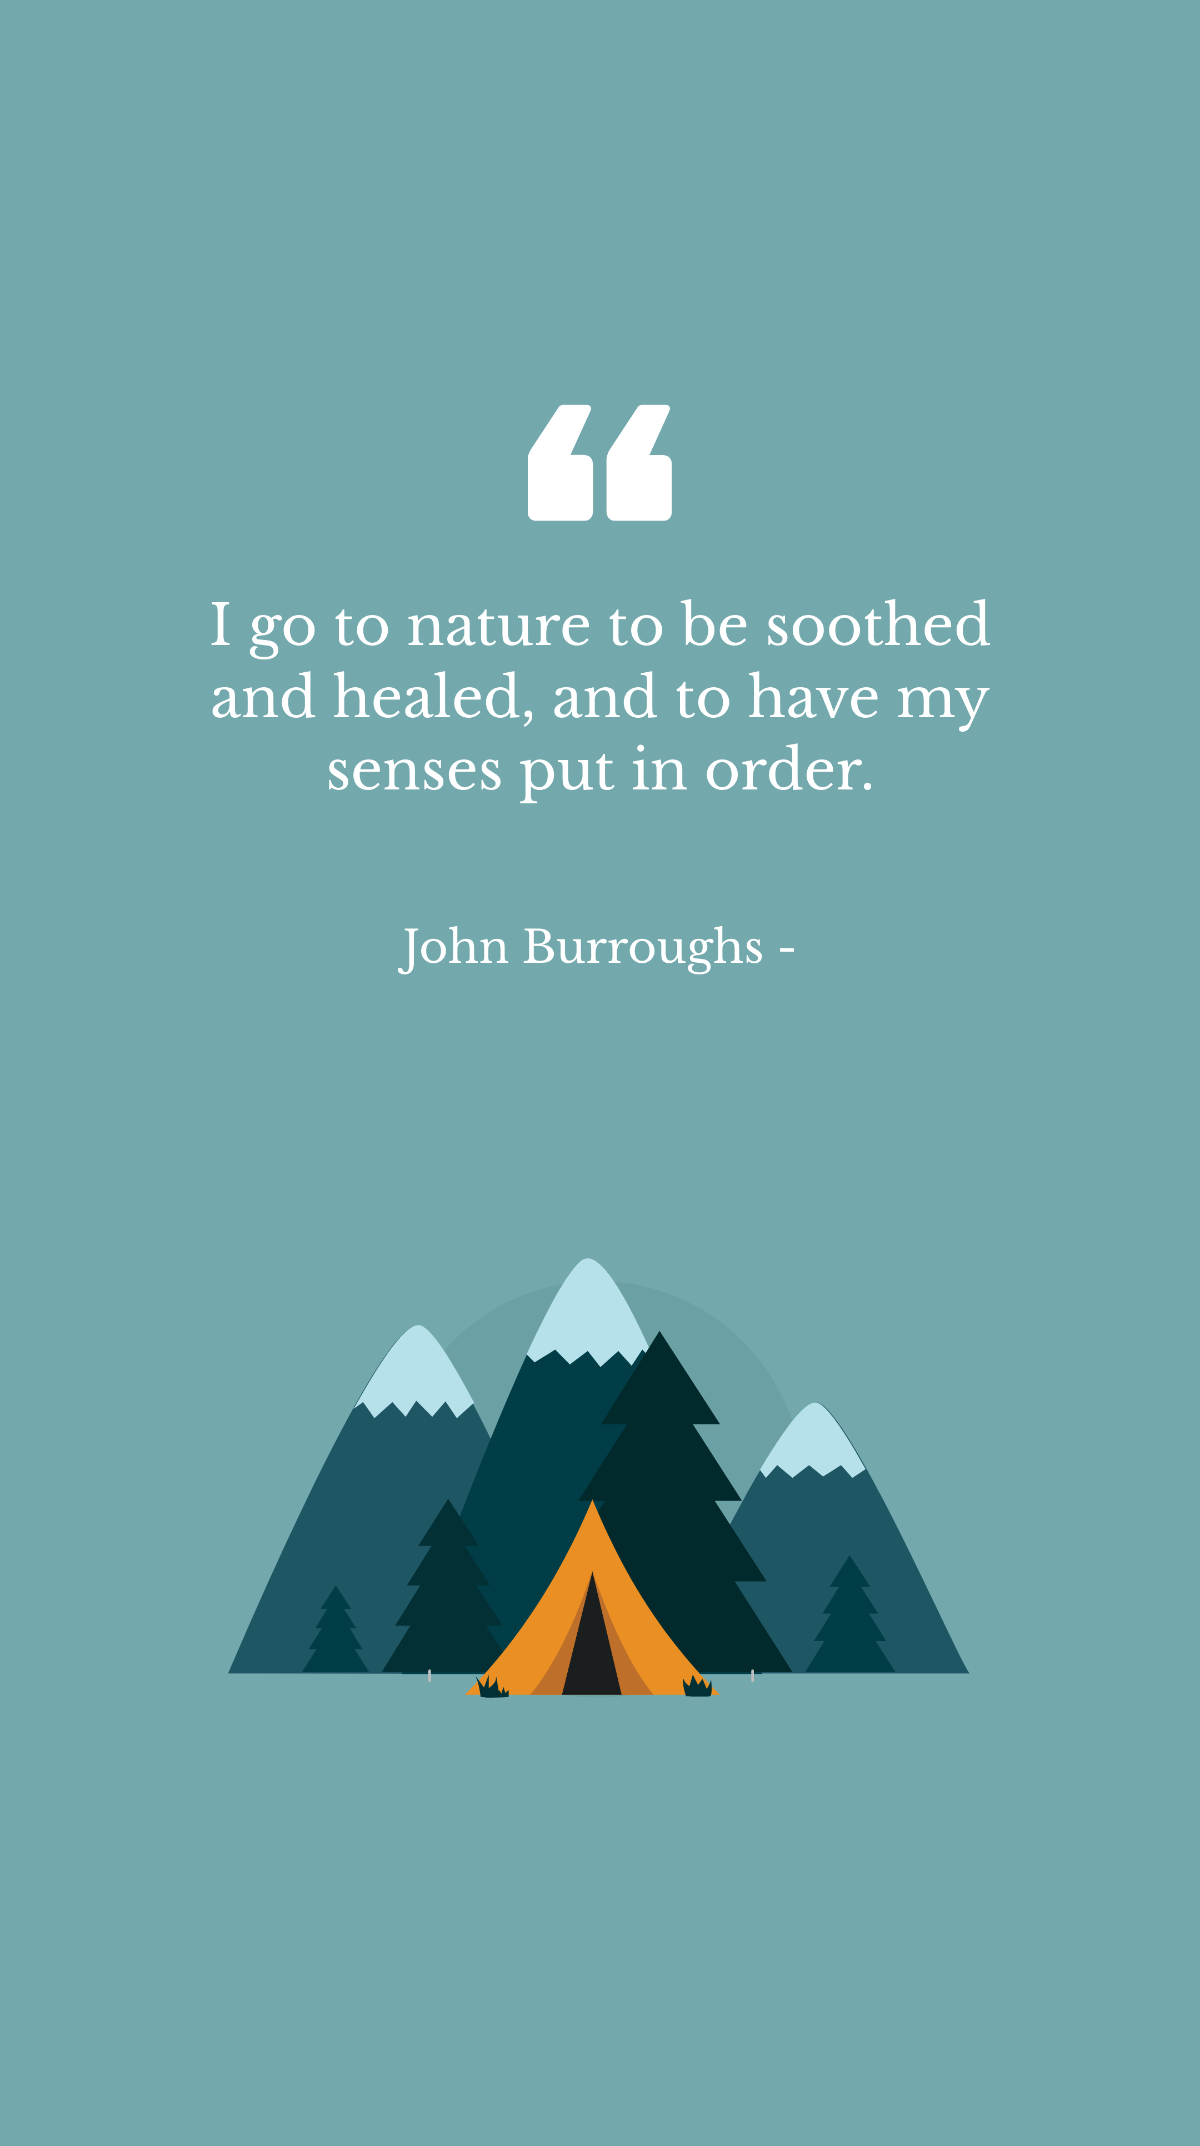 Free John Burroughs - I go to nature to be soothed and healed, and to have my senses put in order. Template